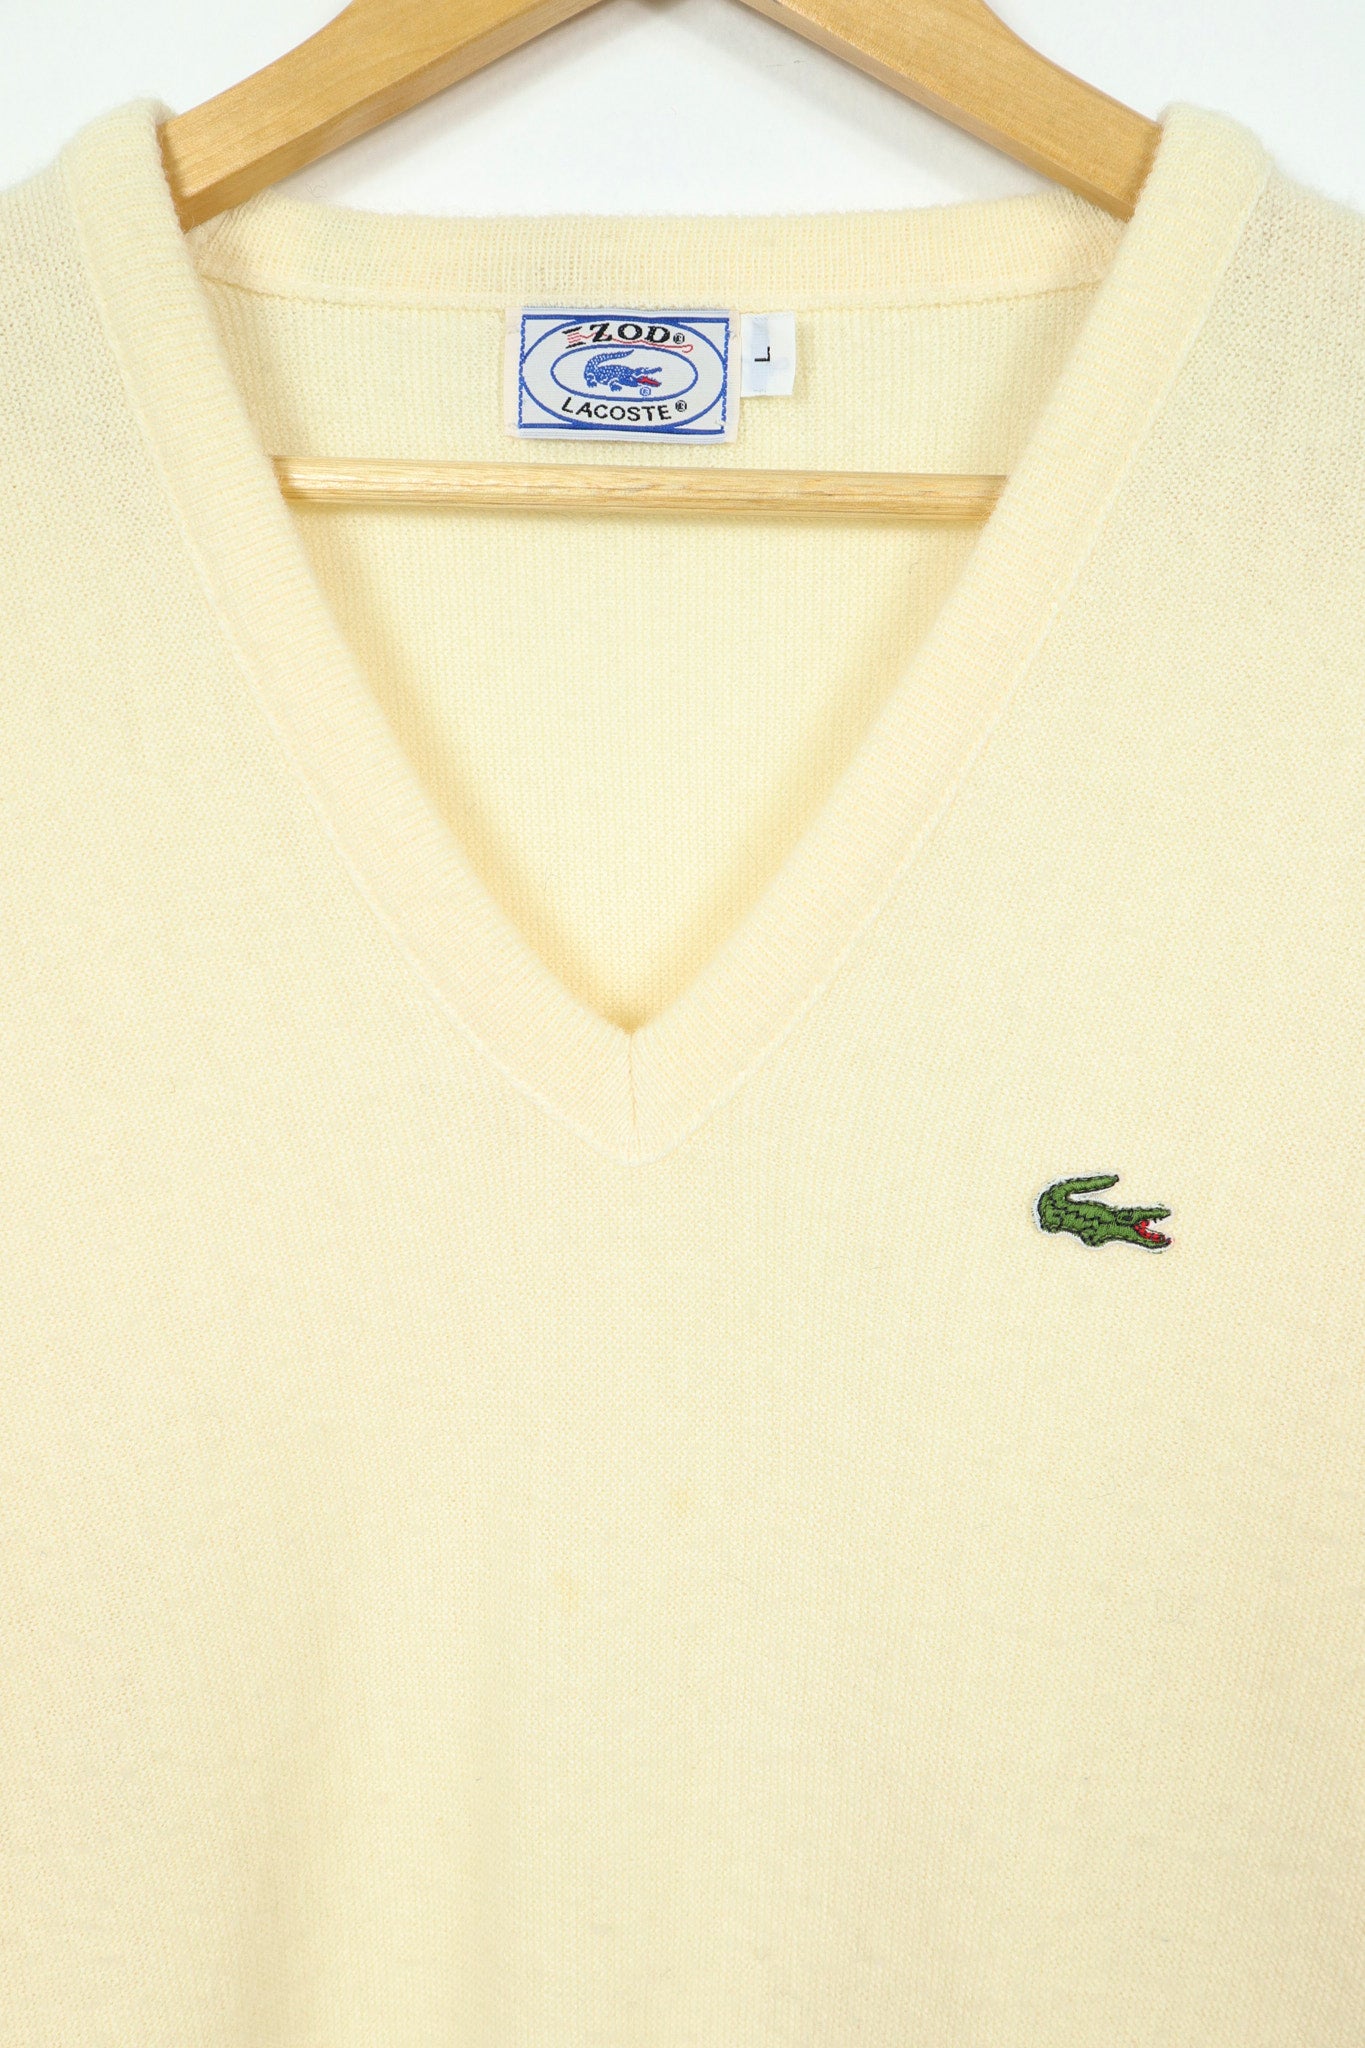 Vintage Lacoste White Sweater